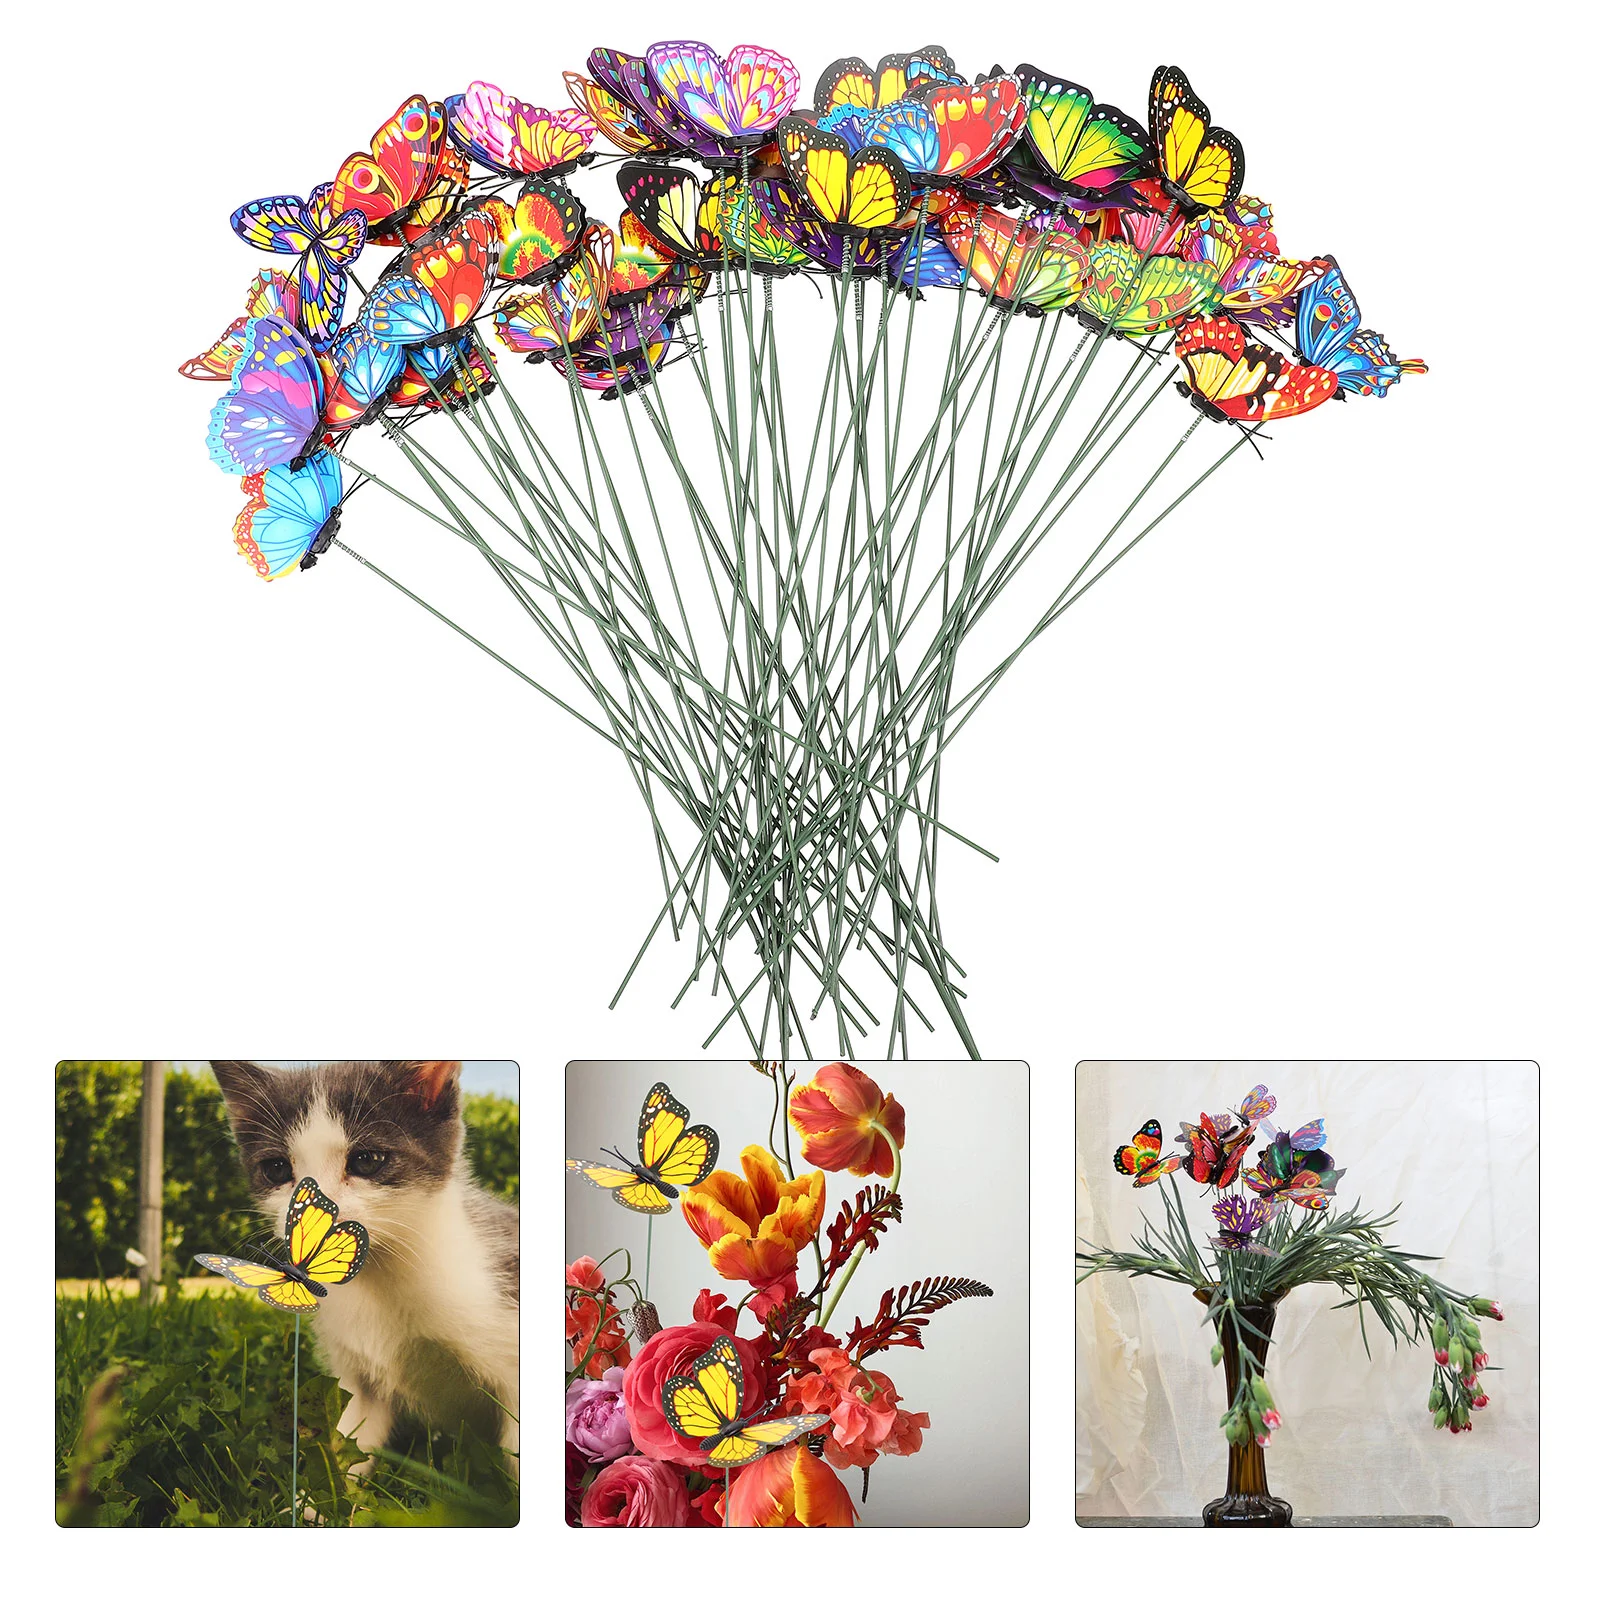 

Garden Stakes Butterflies Stake Metal Yard Flower Cemetery Planter Decorations Party Pinwheels 3D Decor Bed Grave Indoor Outdoor